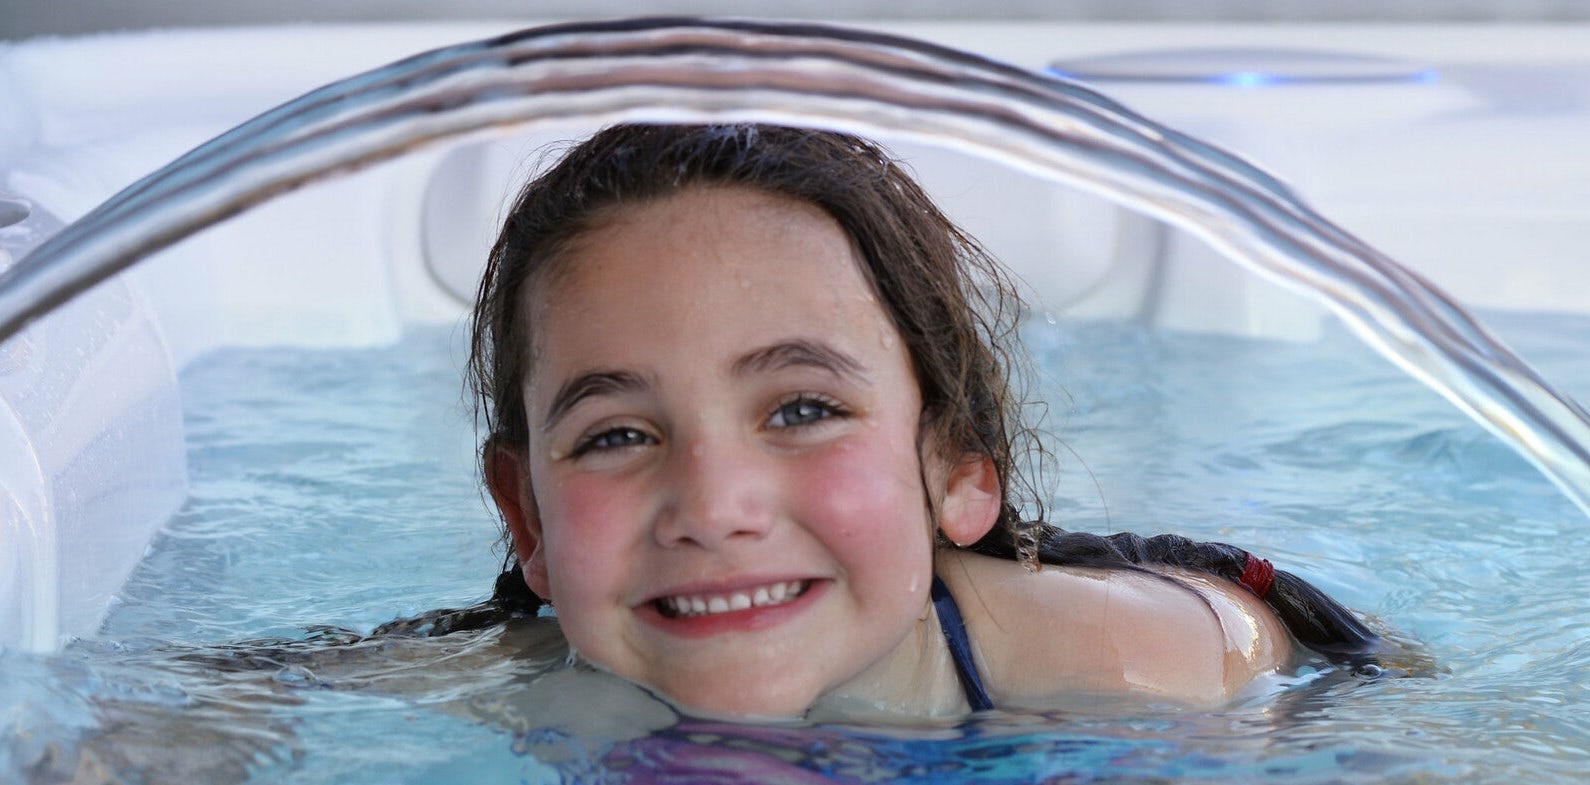 Smiling young girl in a hot tub with a water fountain going over her head.